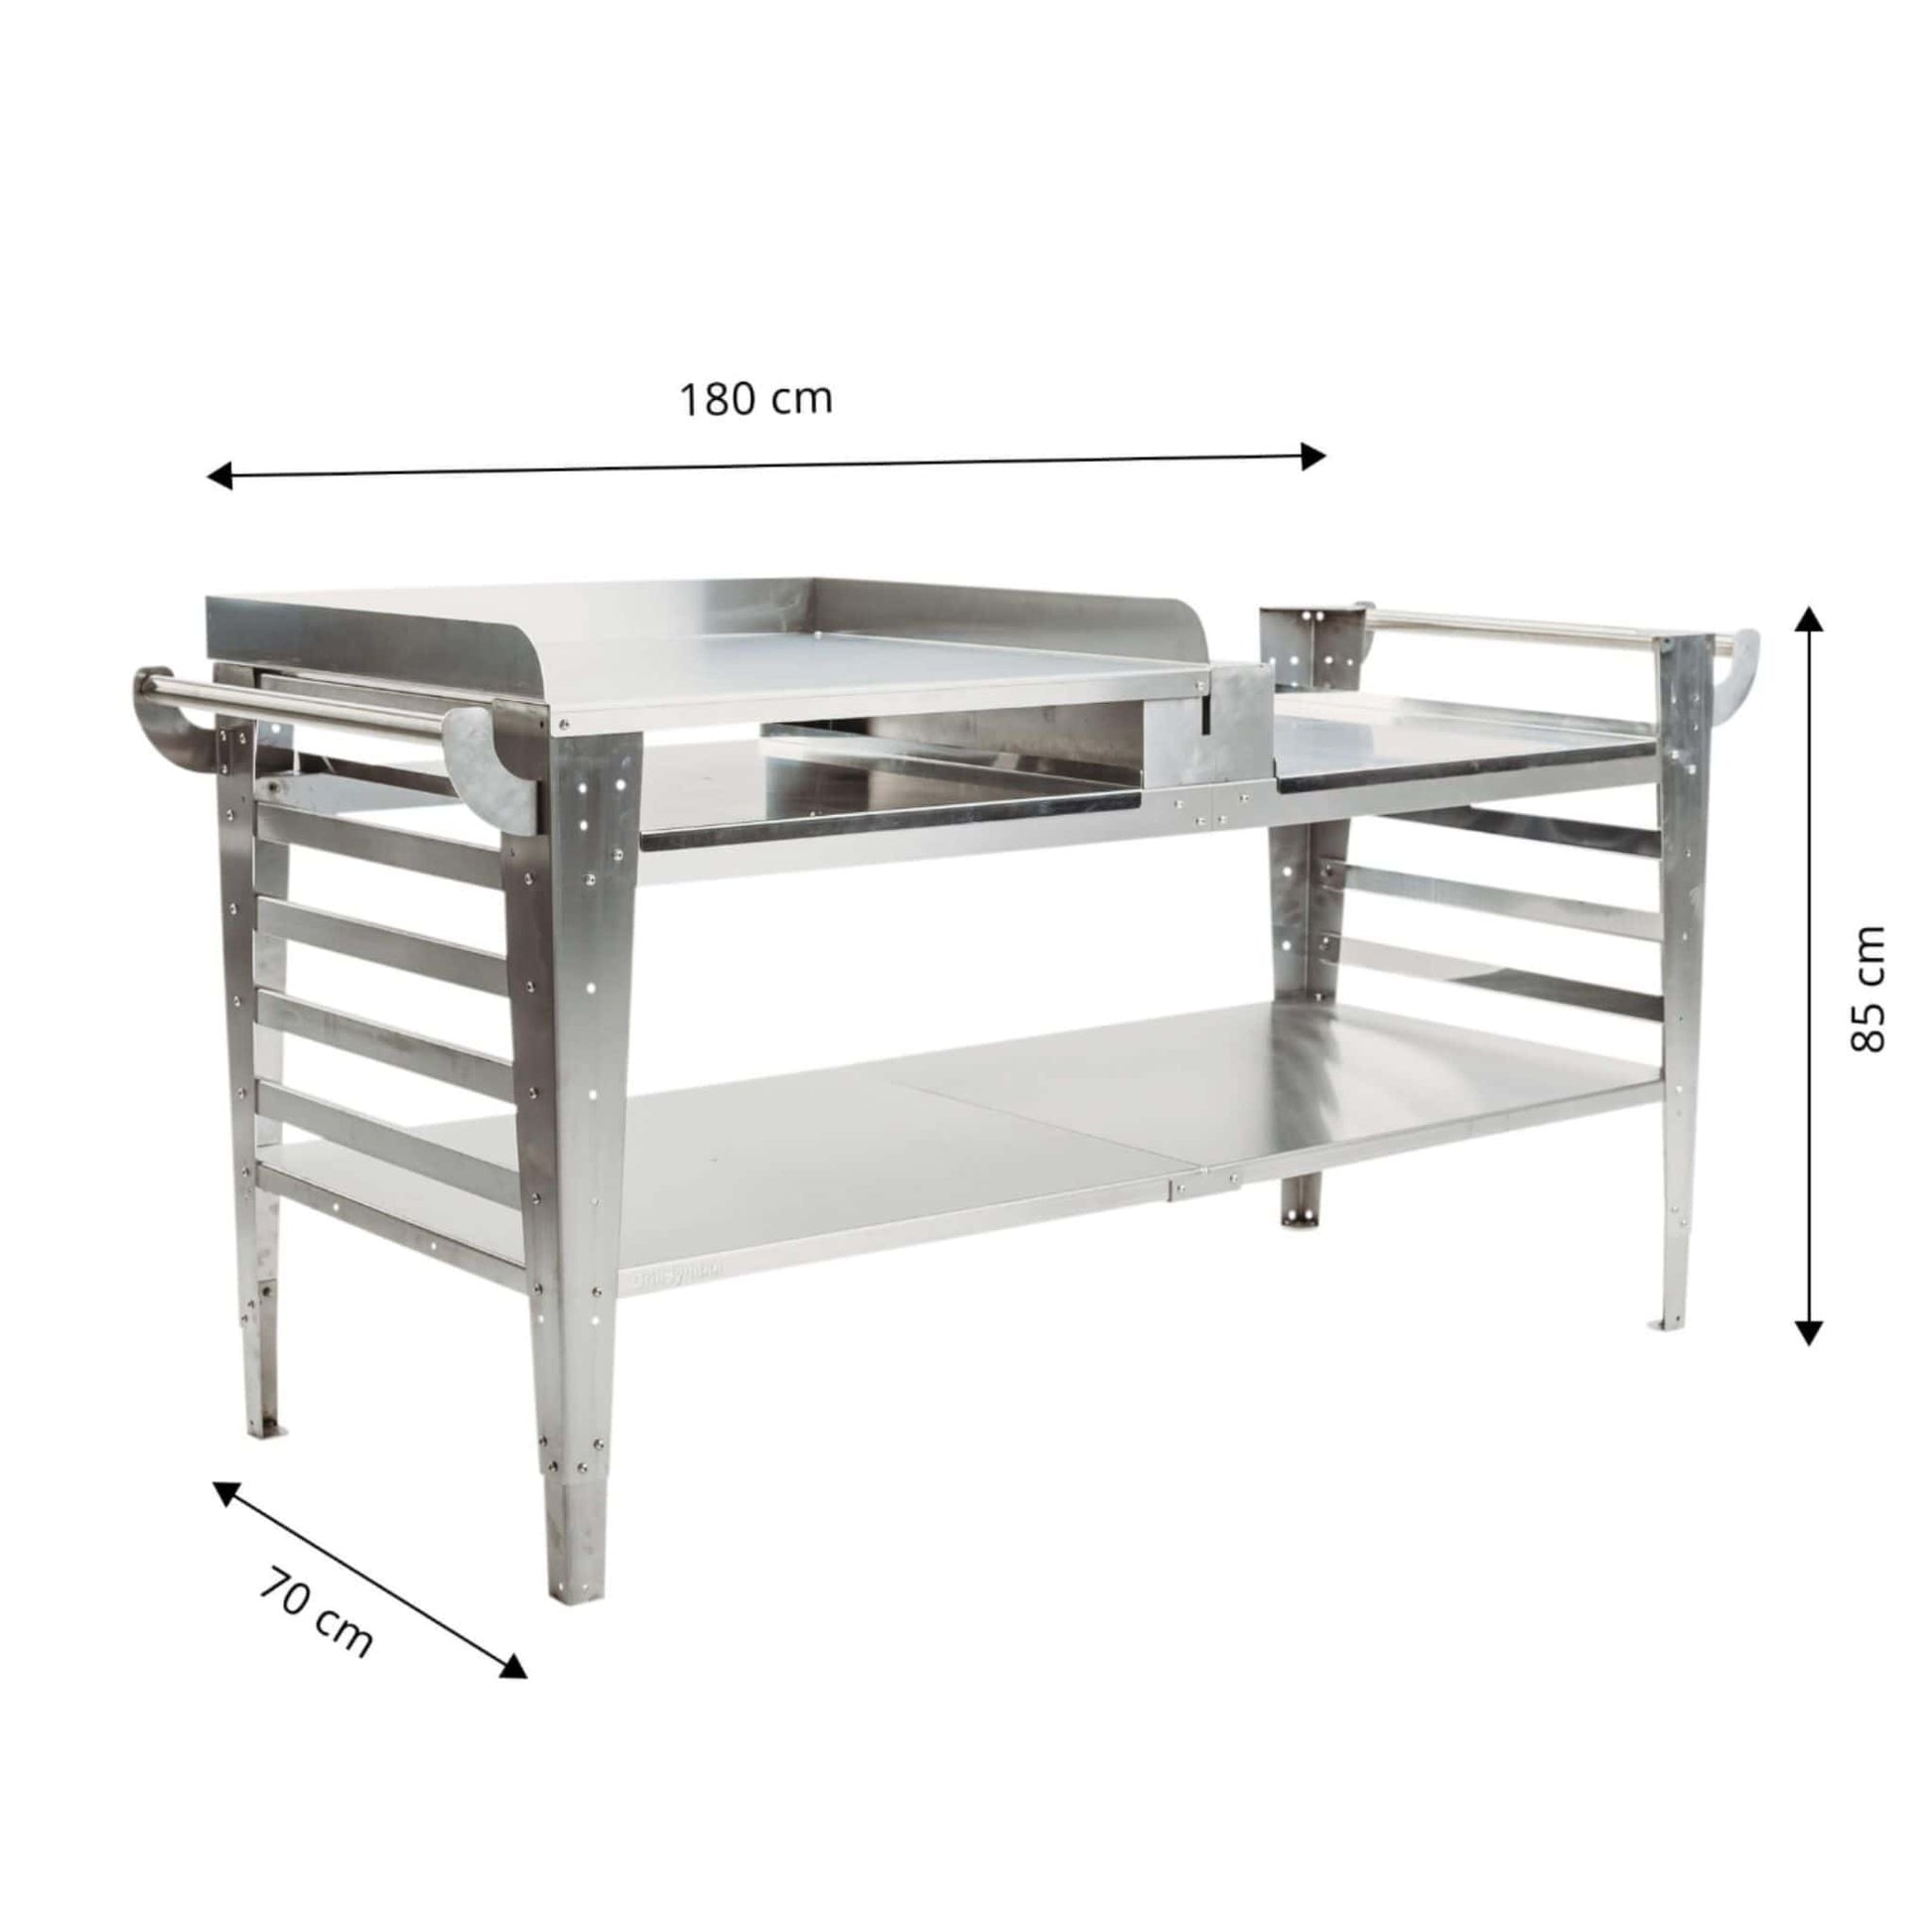 GrillSymbol stainless steel Side Table for Pizza Oven Baso-inox-XL